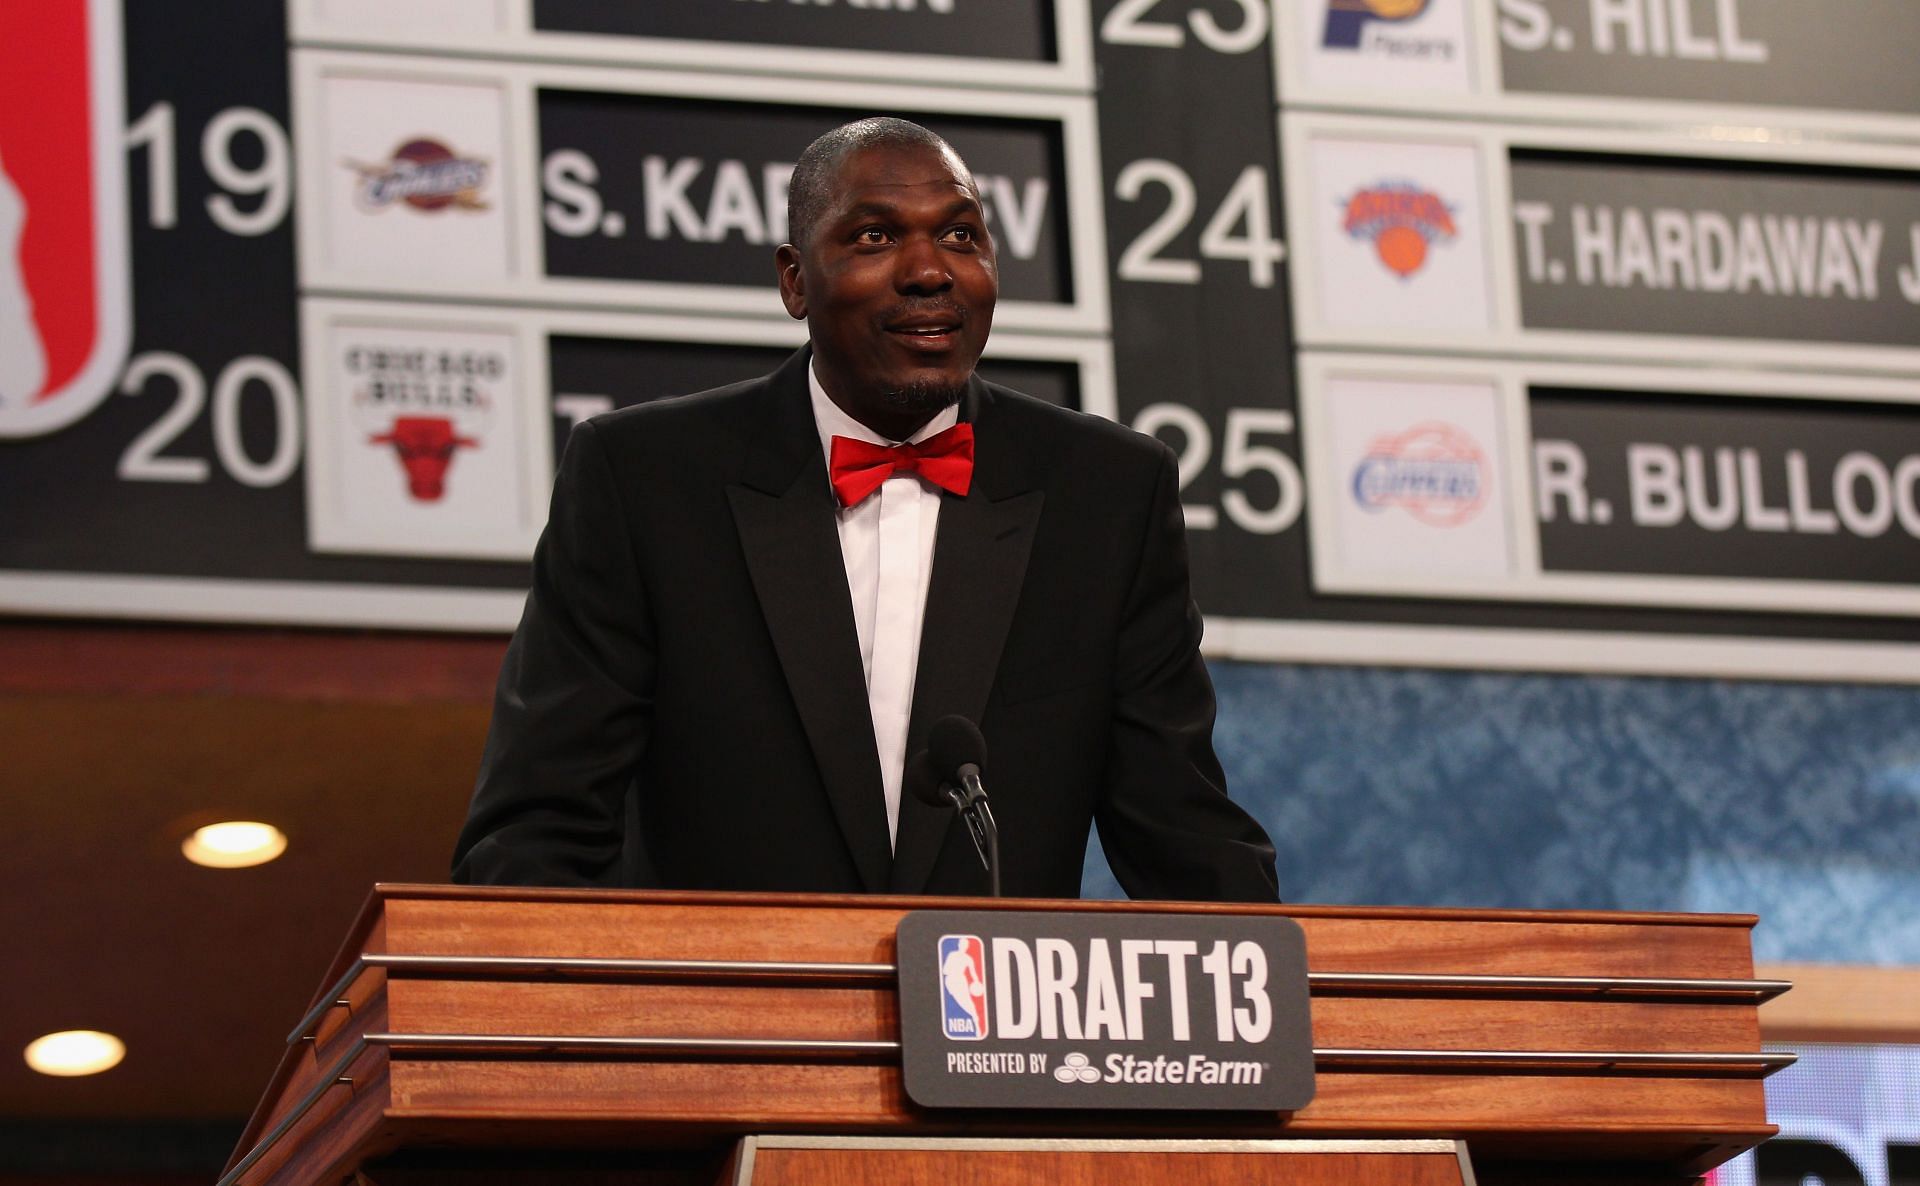 Hakeem Olajuwon speaks onstage during the 2013 NBA Draft at Barclays Center on June 27, 2013 in the Brooklyn borough of New York City.